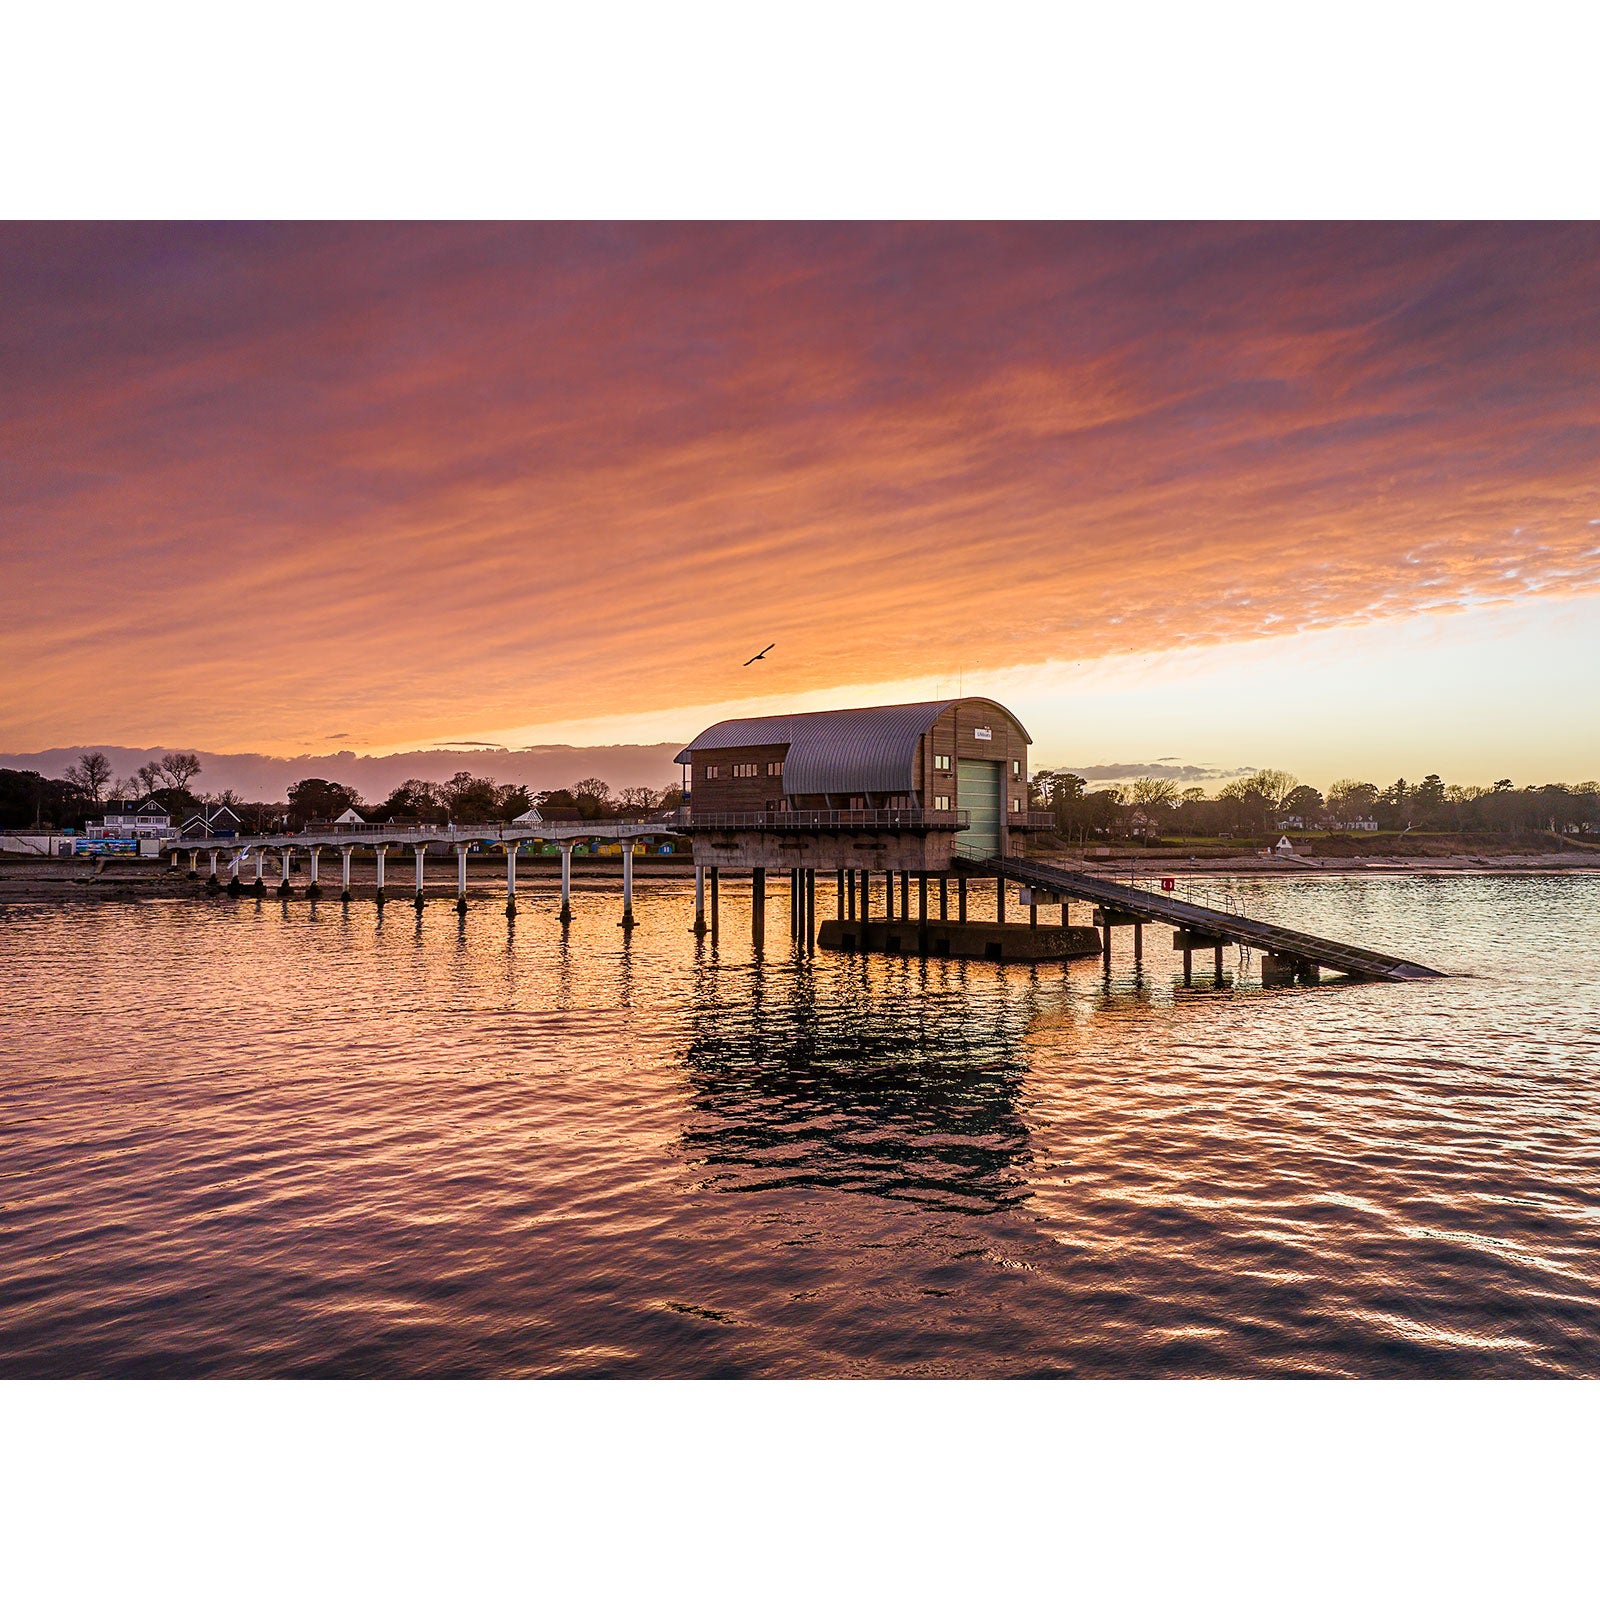 Sunset over a tranquil sea with a pier leading to a building on stilts, reminiscent of the landscapes Available Light Photography often photographed featuring the Bembridge Lifeboat Station.